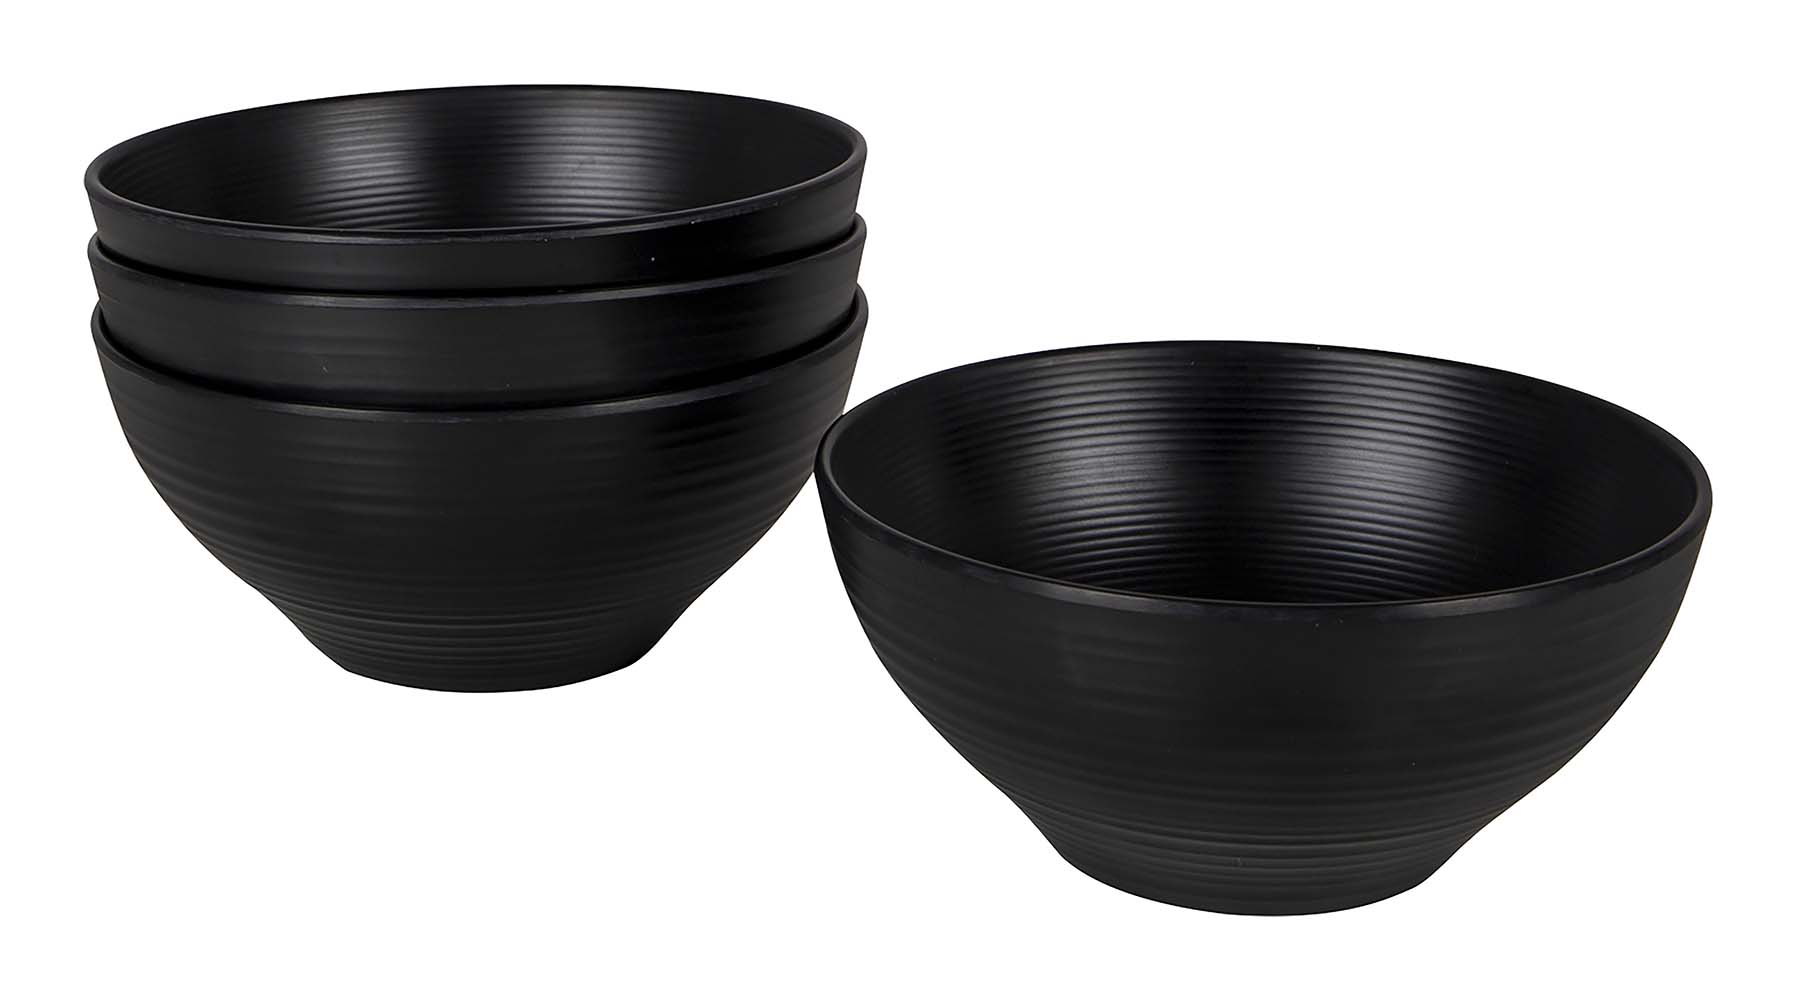 6181491 This Industrial Orville bowls have a robust look. The black dinnerware has a sturdy look with raised edge. Besides the beautiful design, the dinnerware is very light and sturdy. The bowls are good to use on the campsite, as it is virtually unbreakable, shatterproof and scratch-resistant. The bowls can also be used perfectly at home. The 4-piece set is made of high quality 100% melamine and is dishwasher safe and food approved.